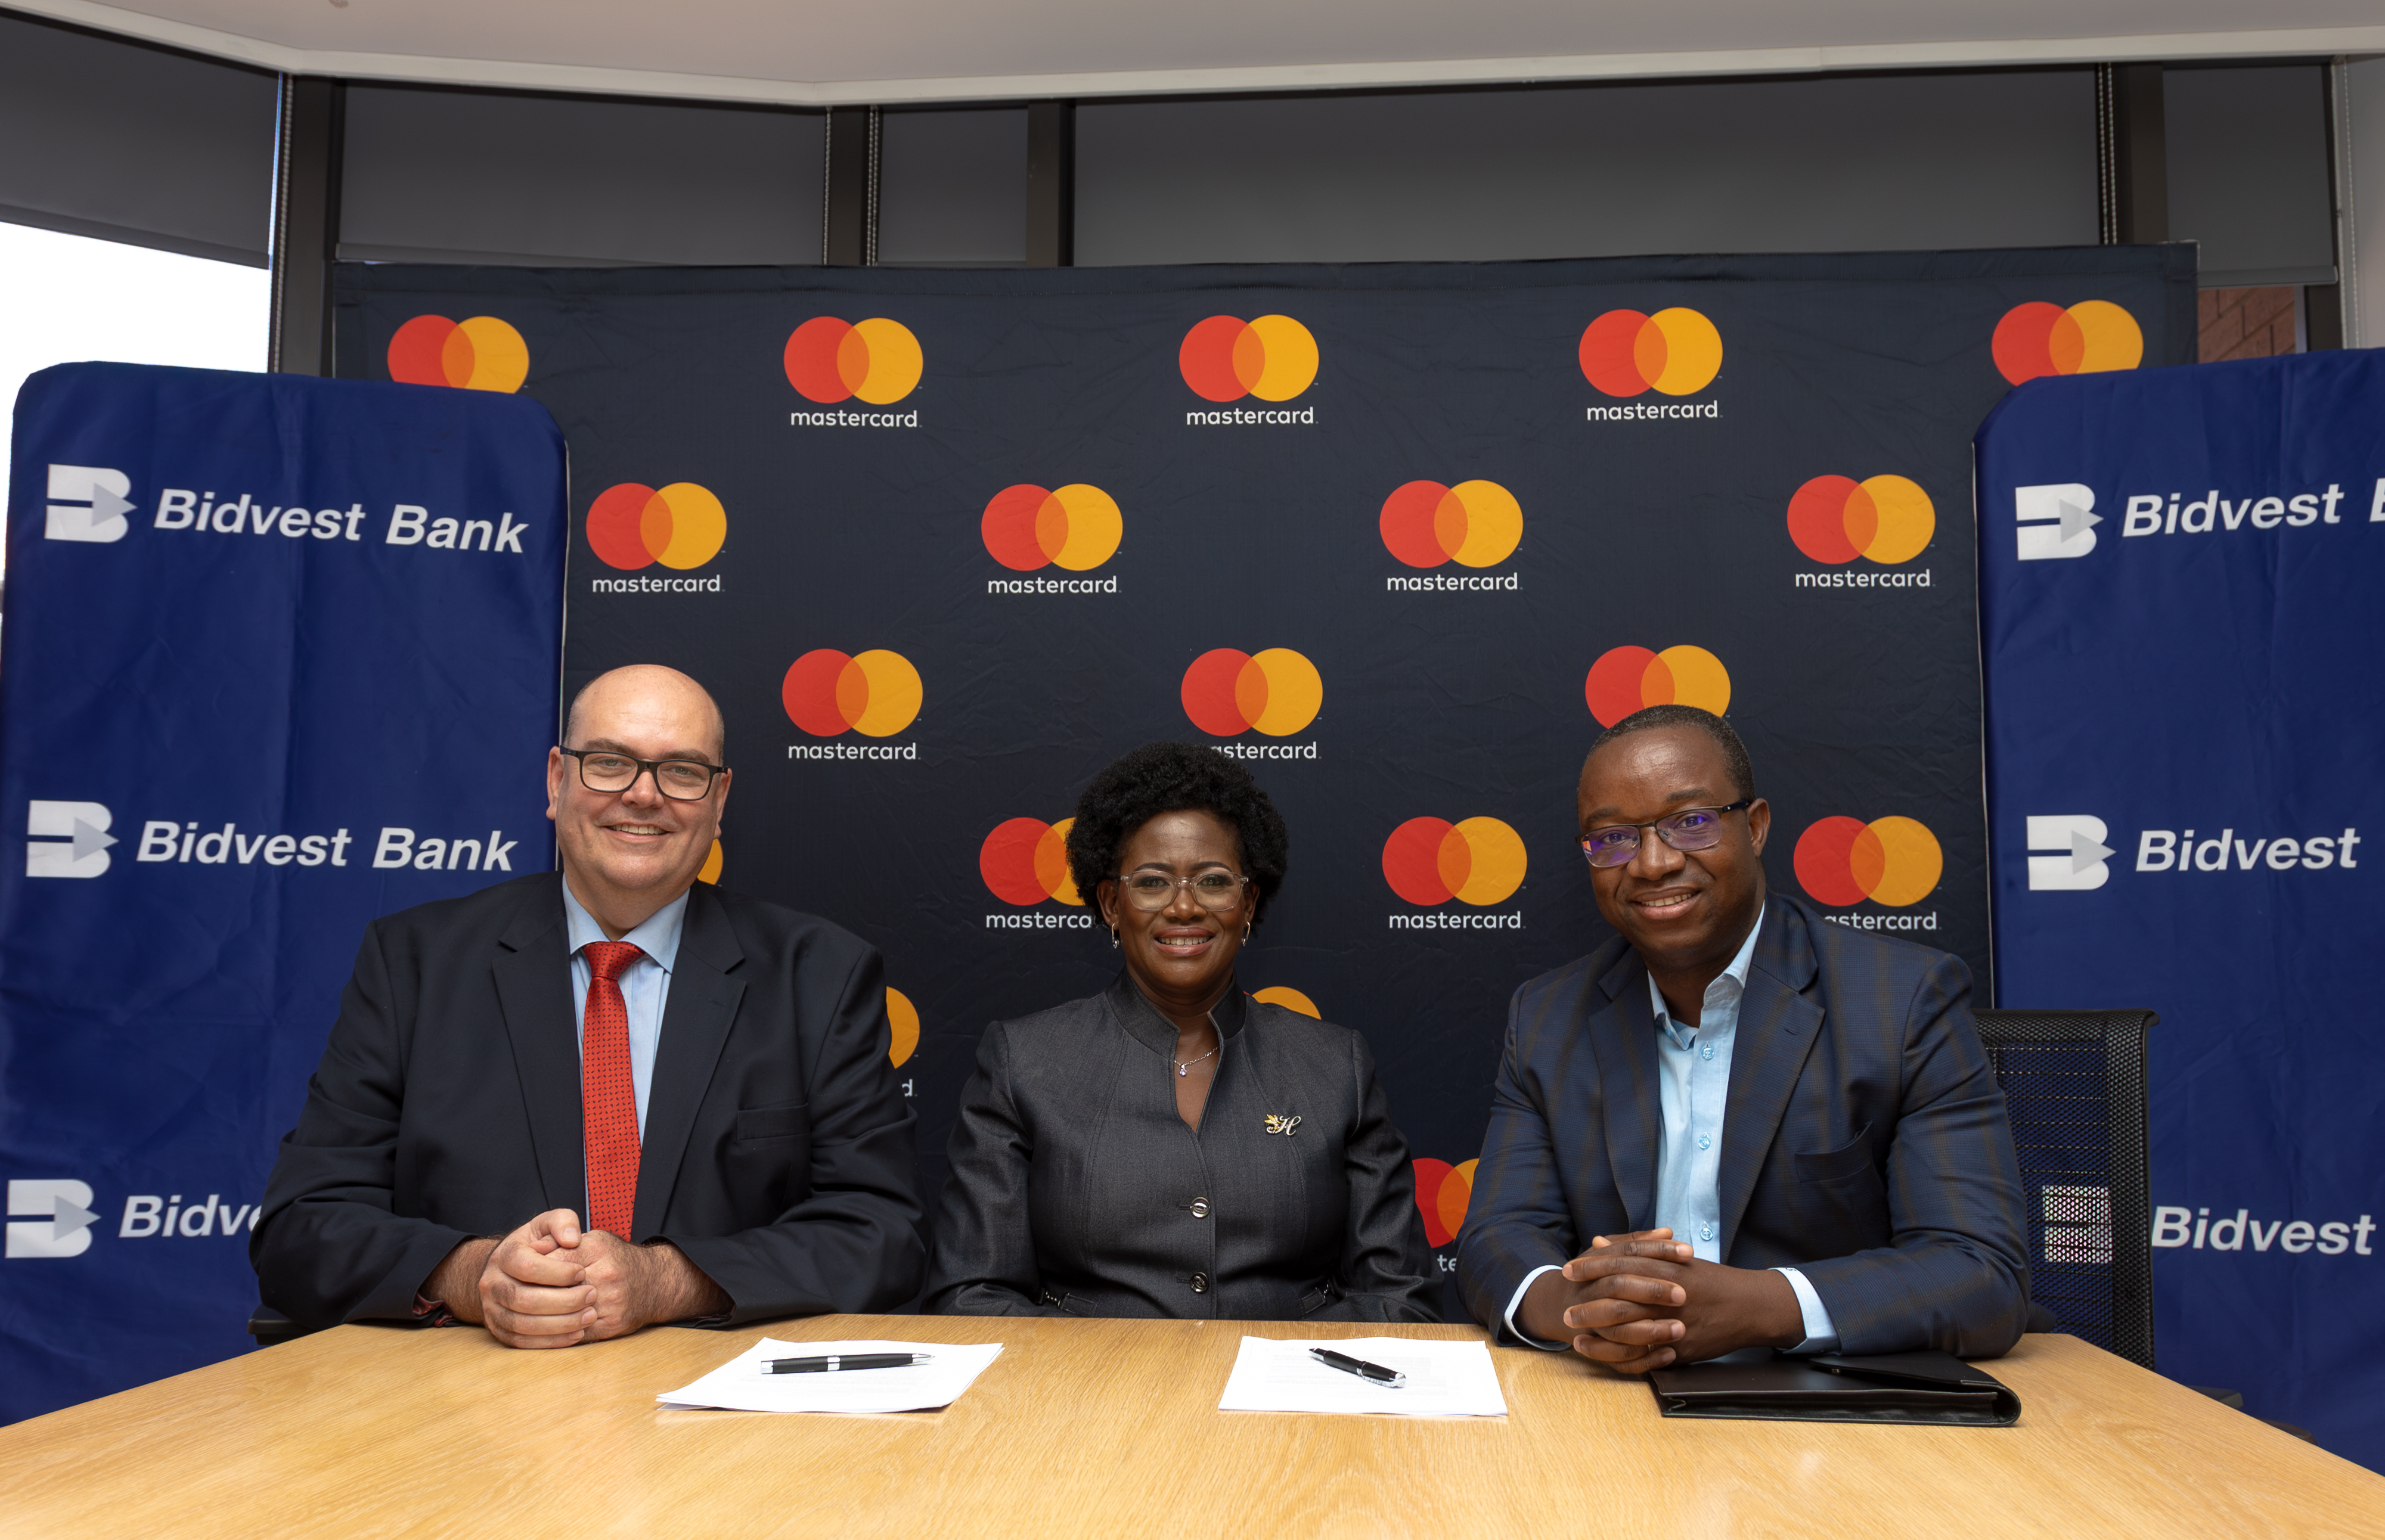 From left to right: Gabriel Swanepoel, Country Manager at Mastercard, Southern Africa (Left), Hannah Sadiki, Chief Executive Officer, Bidvest Financial Services (Middle) and Tendani Sikhwivhilu, Chief Financial Officer at Bidvest Bank (Right) at the MOU signing aimed at transforming international remittances for South Africans through the Bidvest Bank BidSend, powered by Mastercard.